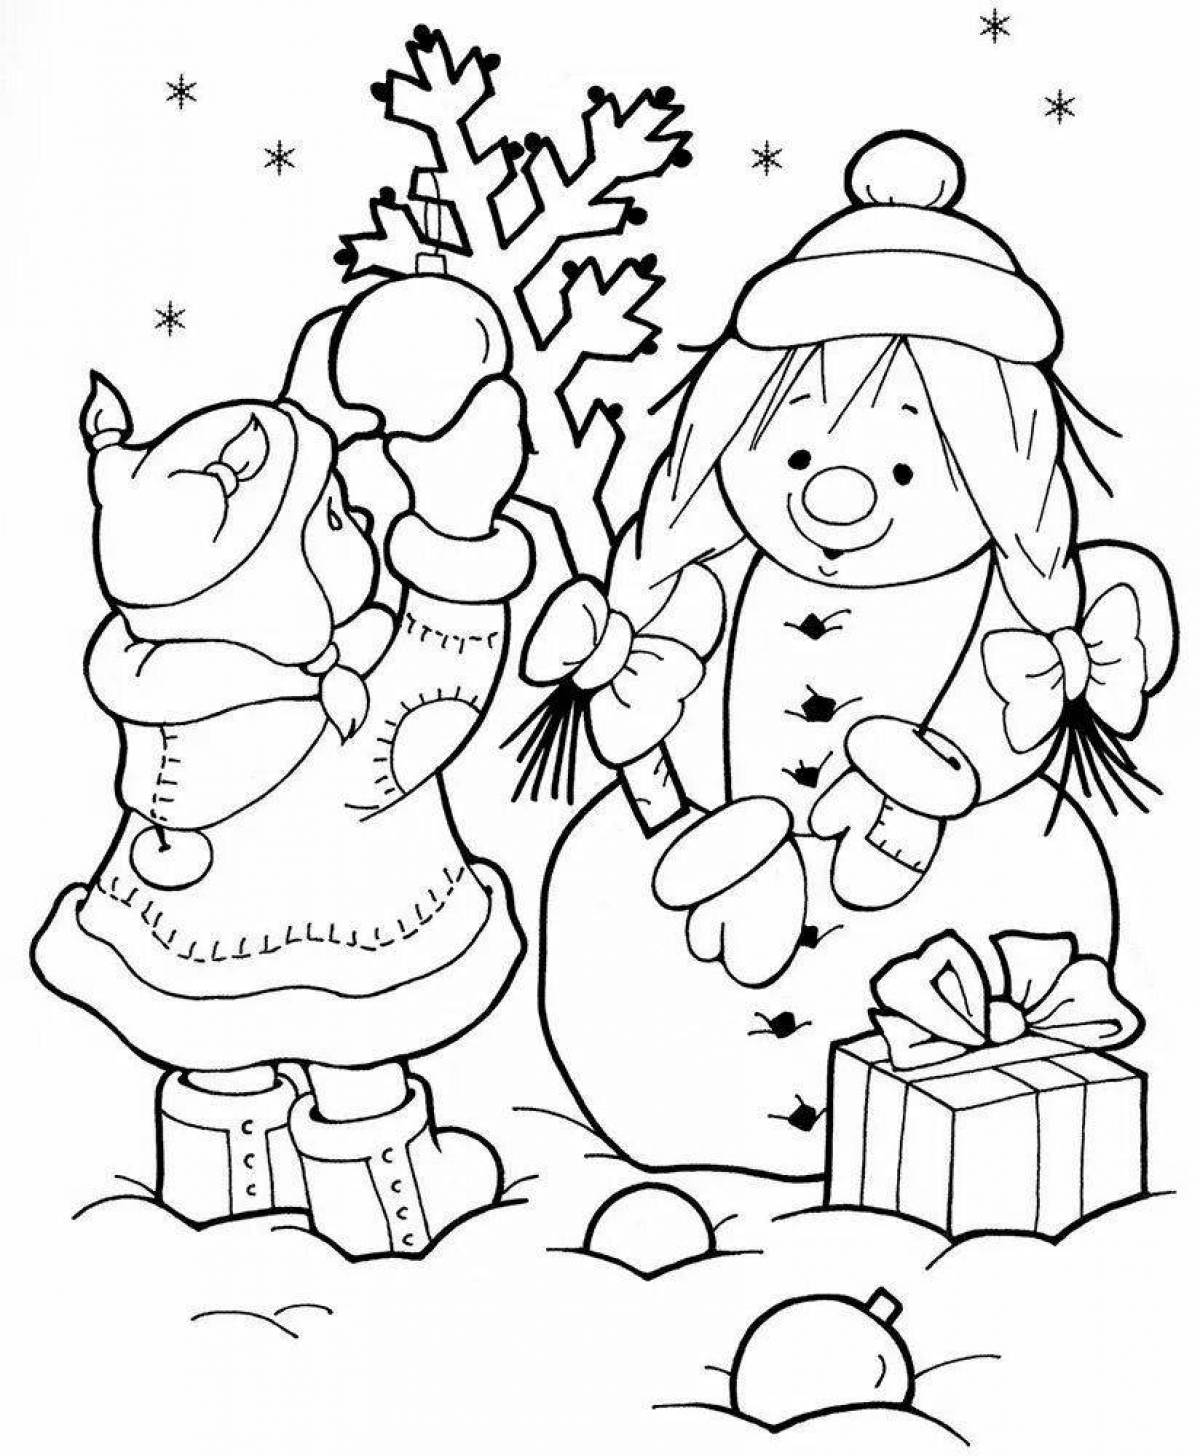 Fantastic coloring book for children 3 years old winter